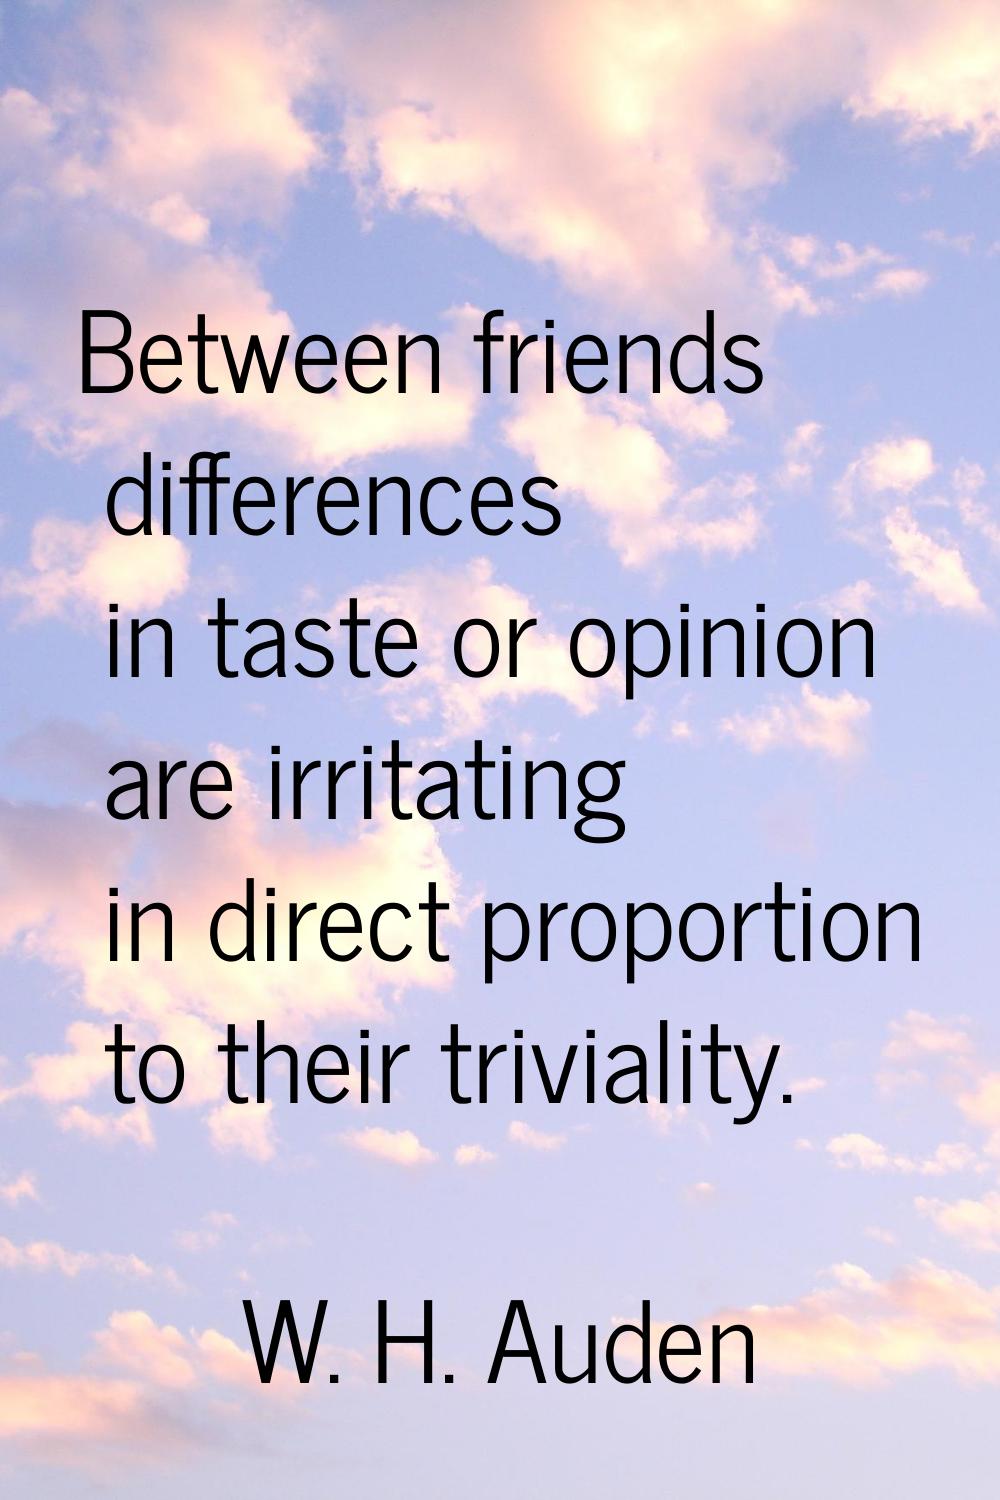 Between friends differences in taste or opinion are irritating in direct proportion to their trivia